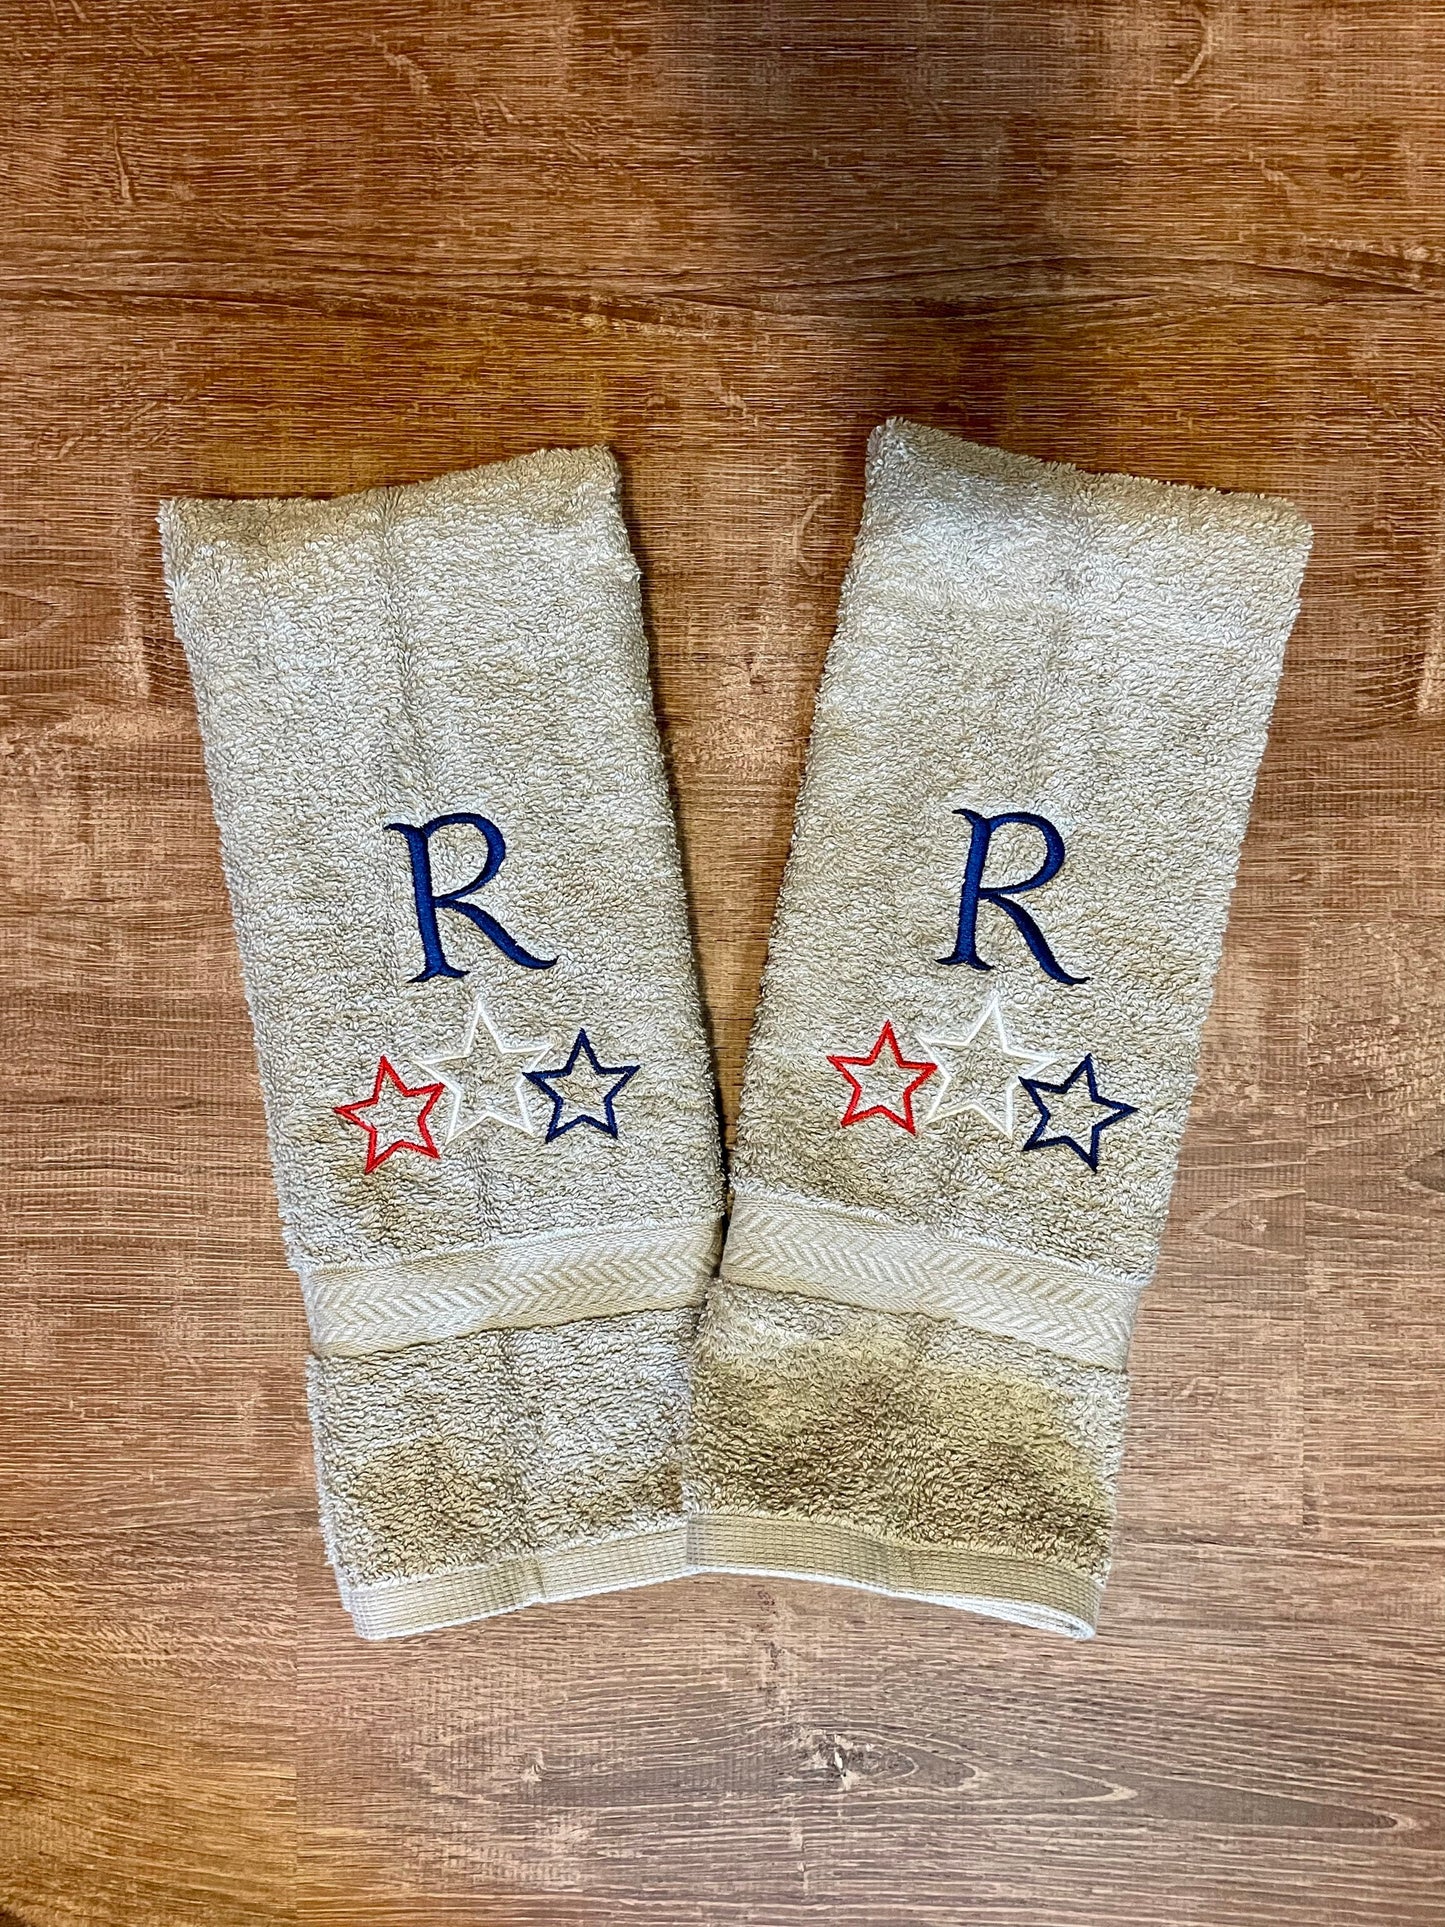 Patriotic Personalized Bathroom Hand Towels -Cotton- Embroidered-Great for boat